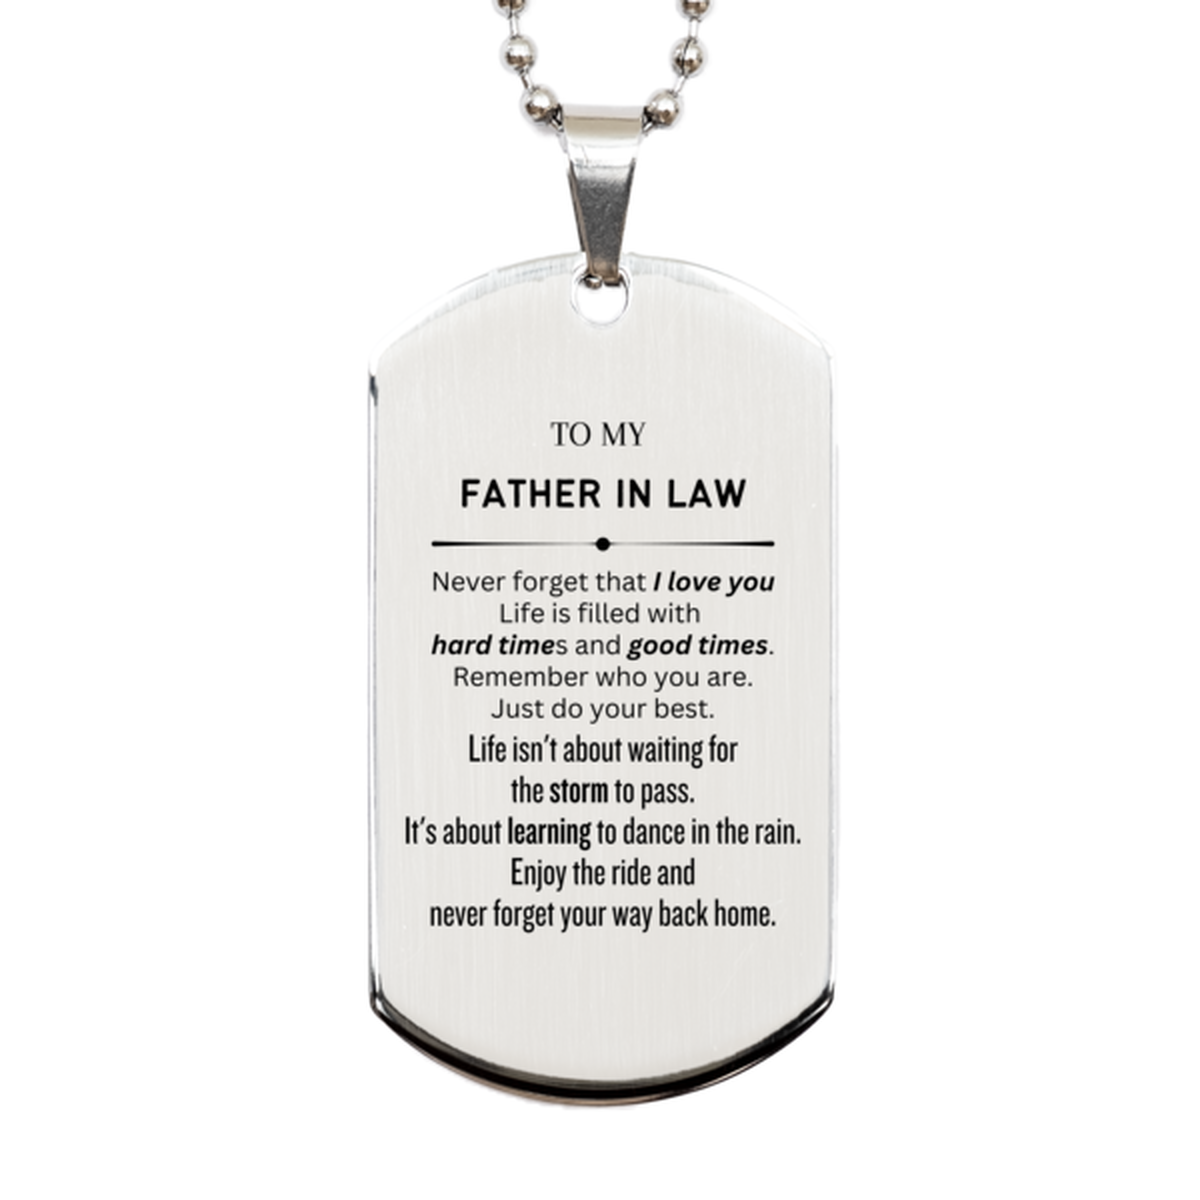 Christmas Father In Law Silver Dog Tag Gifts, To My Father In Law Birthday Thank You Gifts For Father In Law, Graduation Unique Gifts For Father In Law To My Father In Law Never forget that I love you life is filled with hard times and good times. Remembe